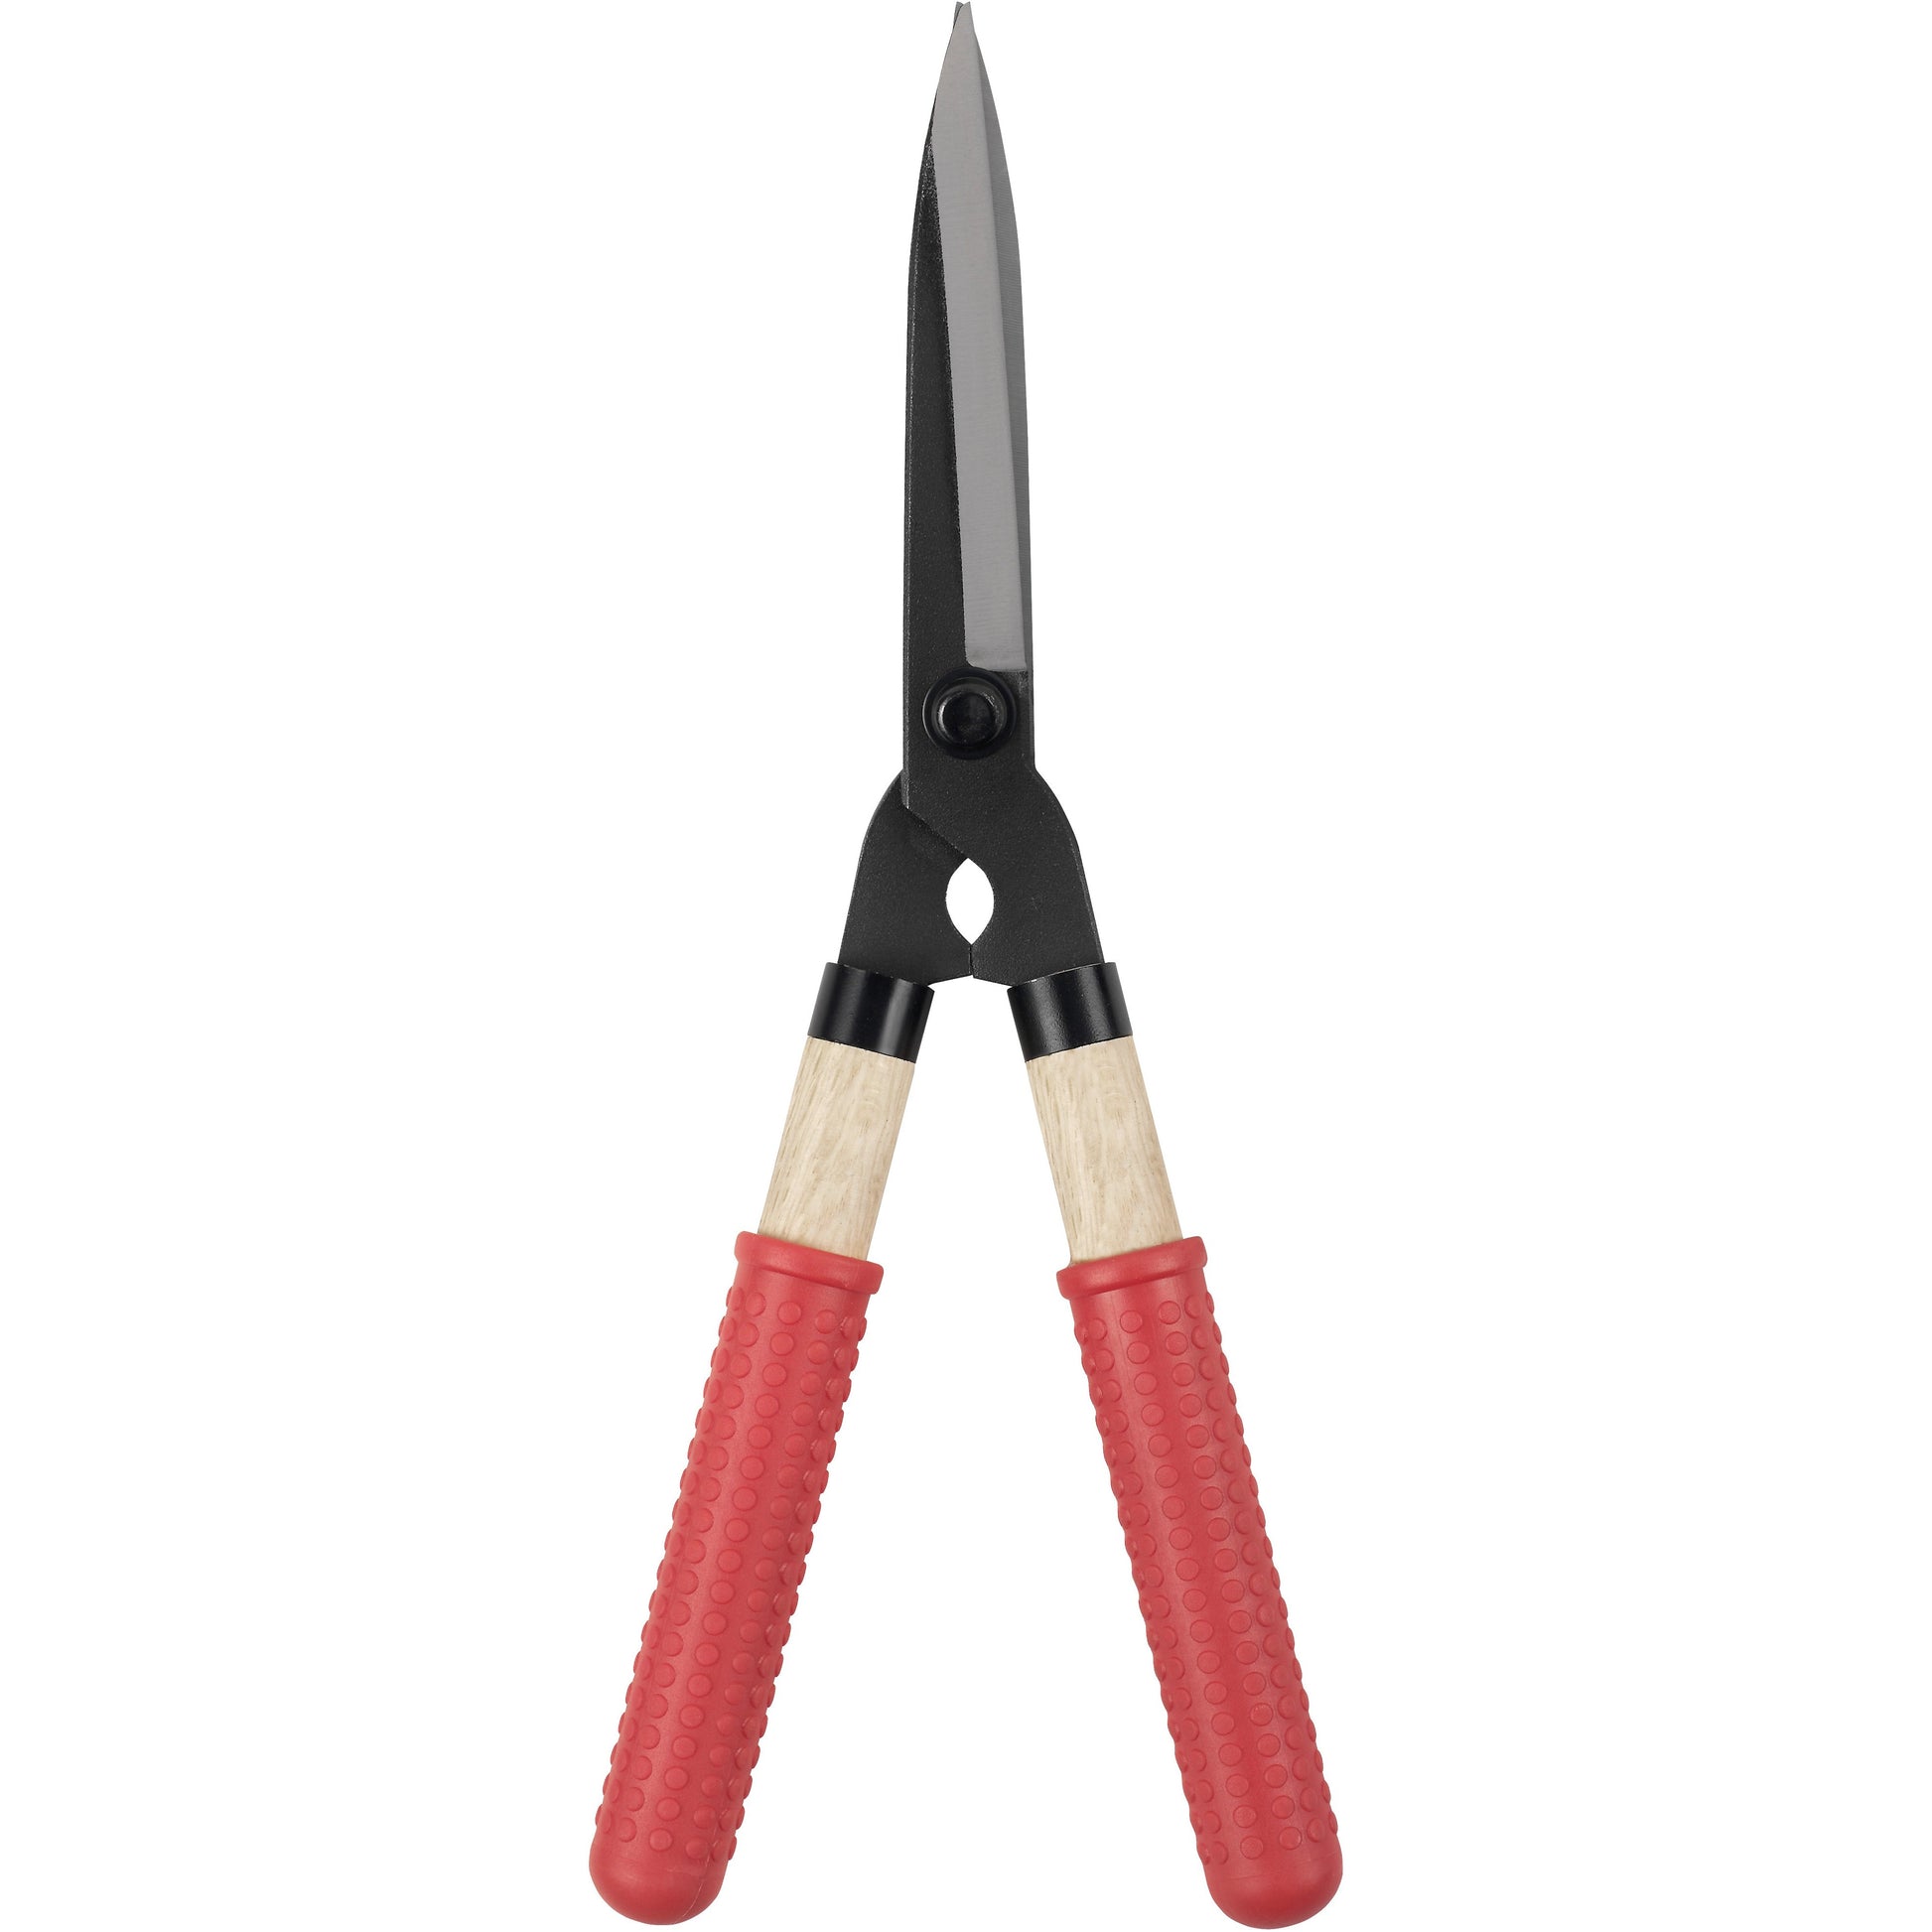 Mini shears by Niwaki. Made in Japan. SK steel blades, white oak handles with red rubber grips.